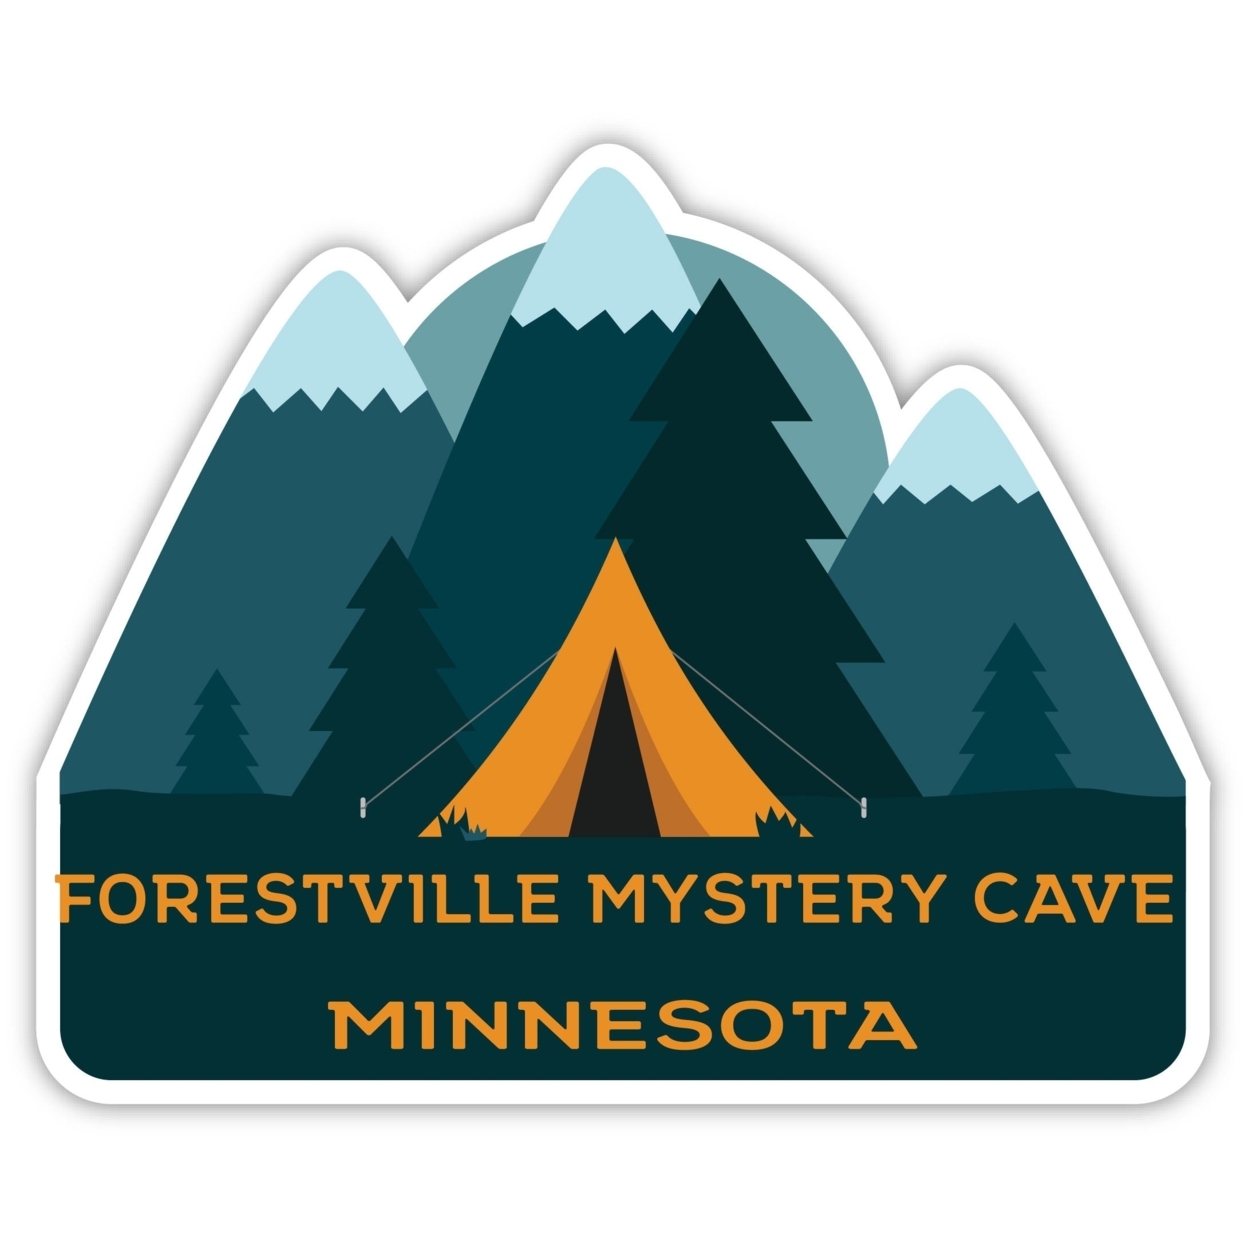 Forestville Mystery Cave Minnesota Souvenir Decorative Stickers (Choose Theme And Size) - 4-Pack, 8-Inch, Tent